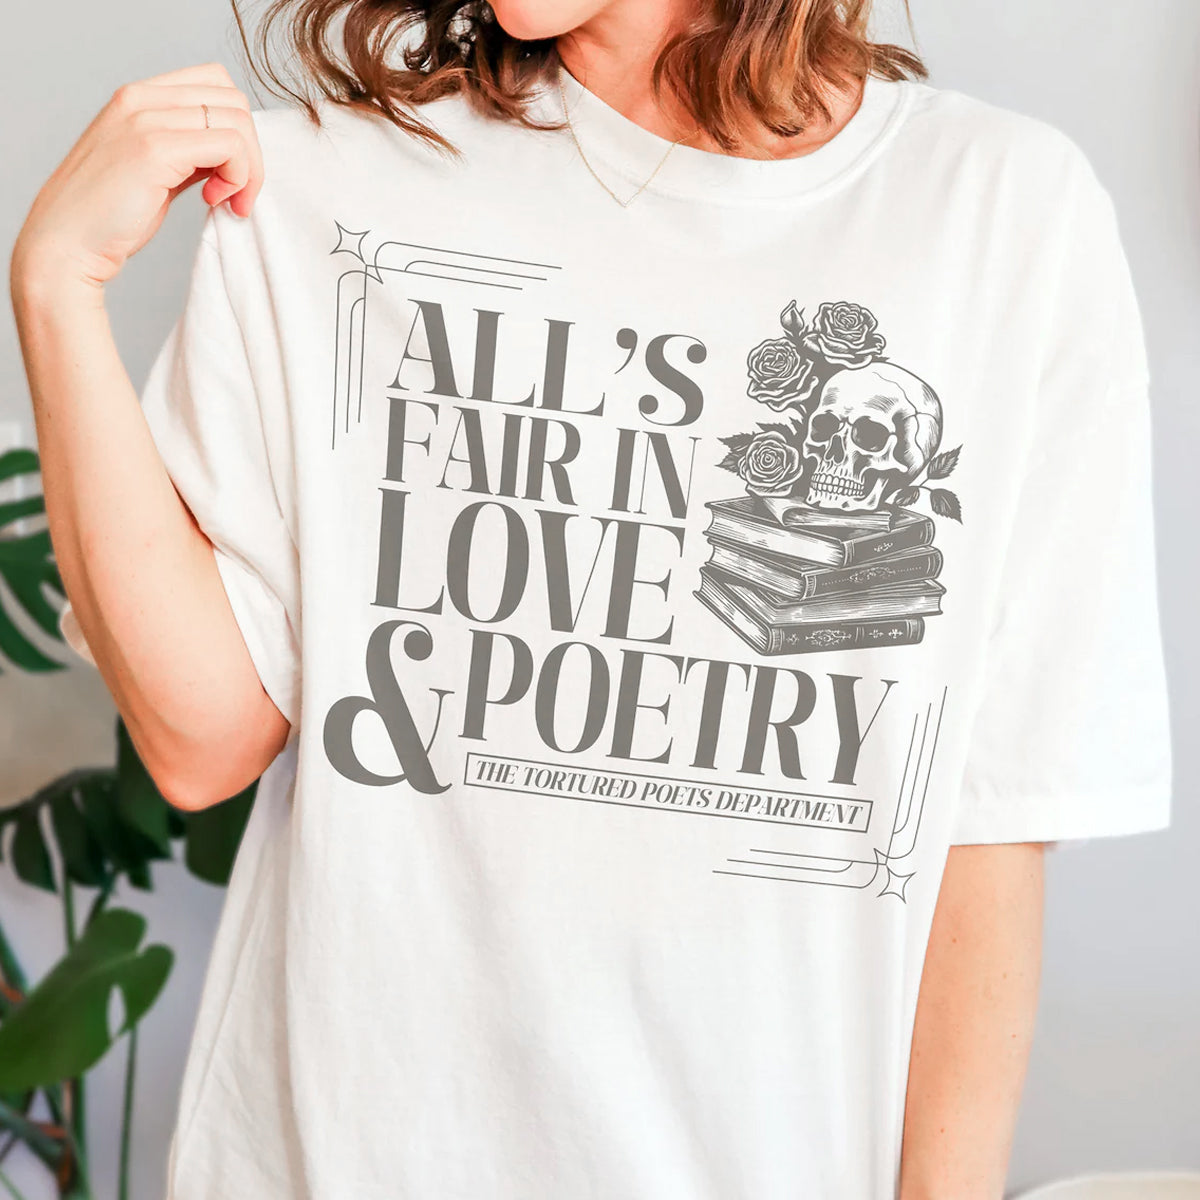 alls fair in love and poetry the tortured poets department new album shirt 1713933588940.jpg